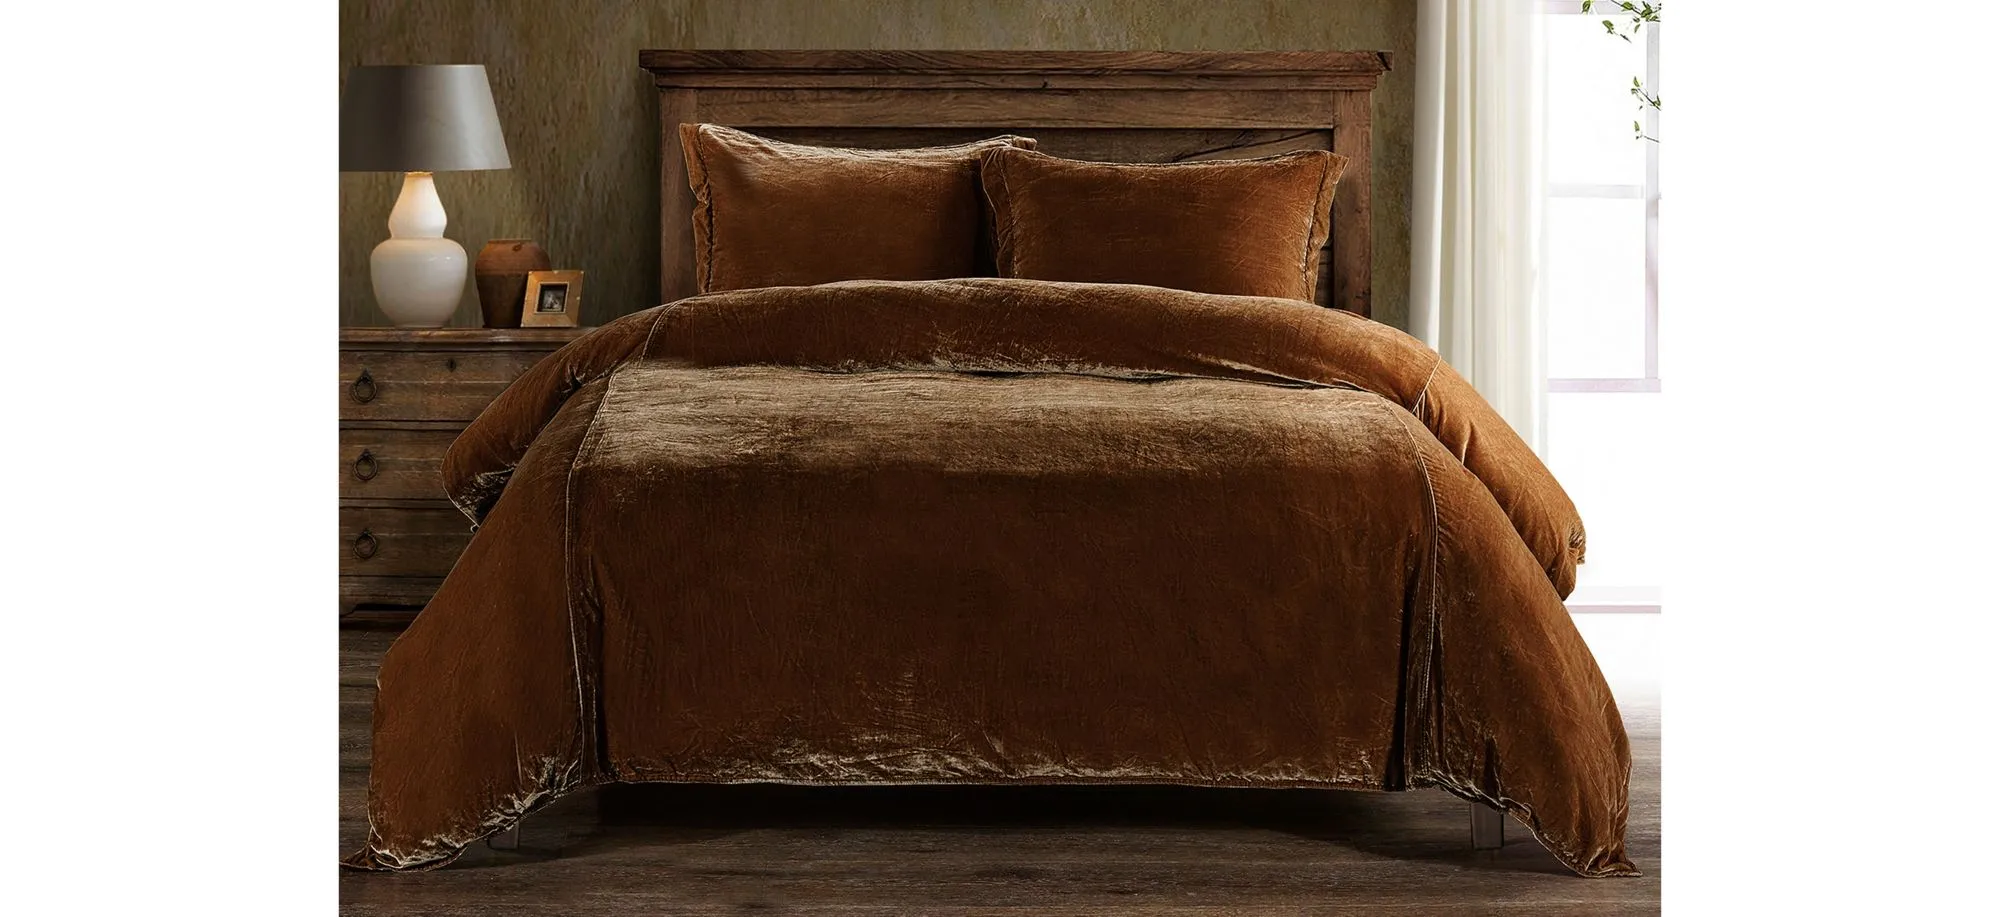 Sweet Delights 3-pc. Duvet Cover Set in Copper Brown by HiEnd Accents